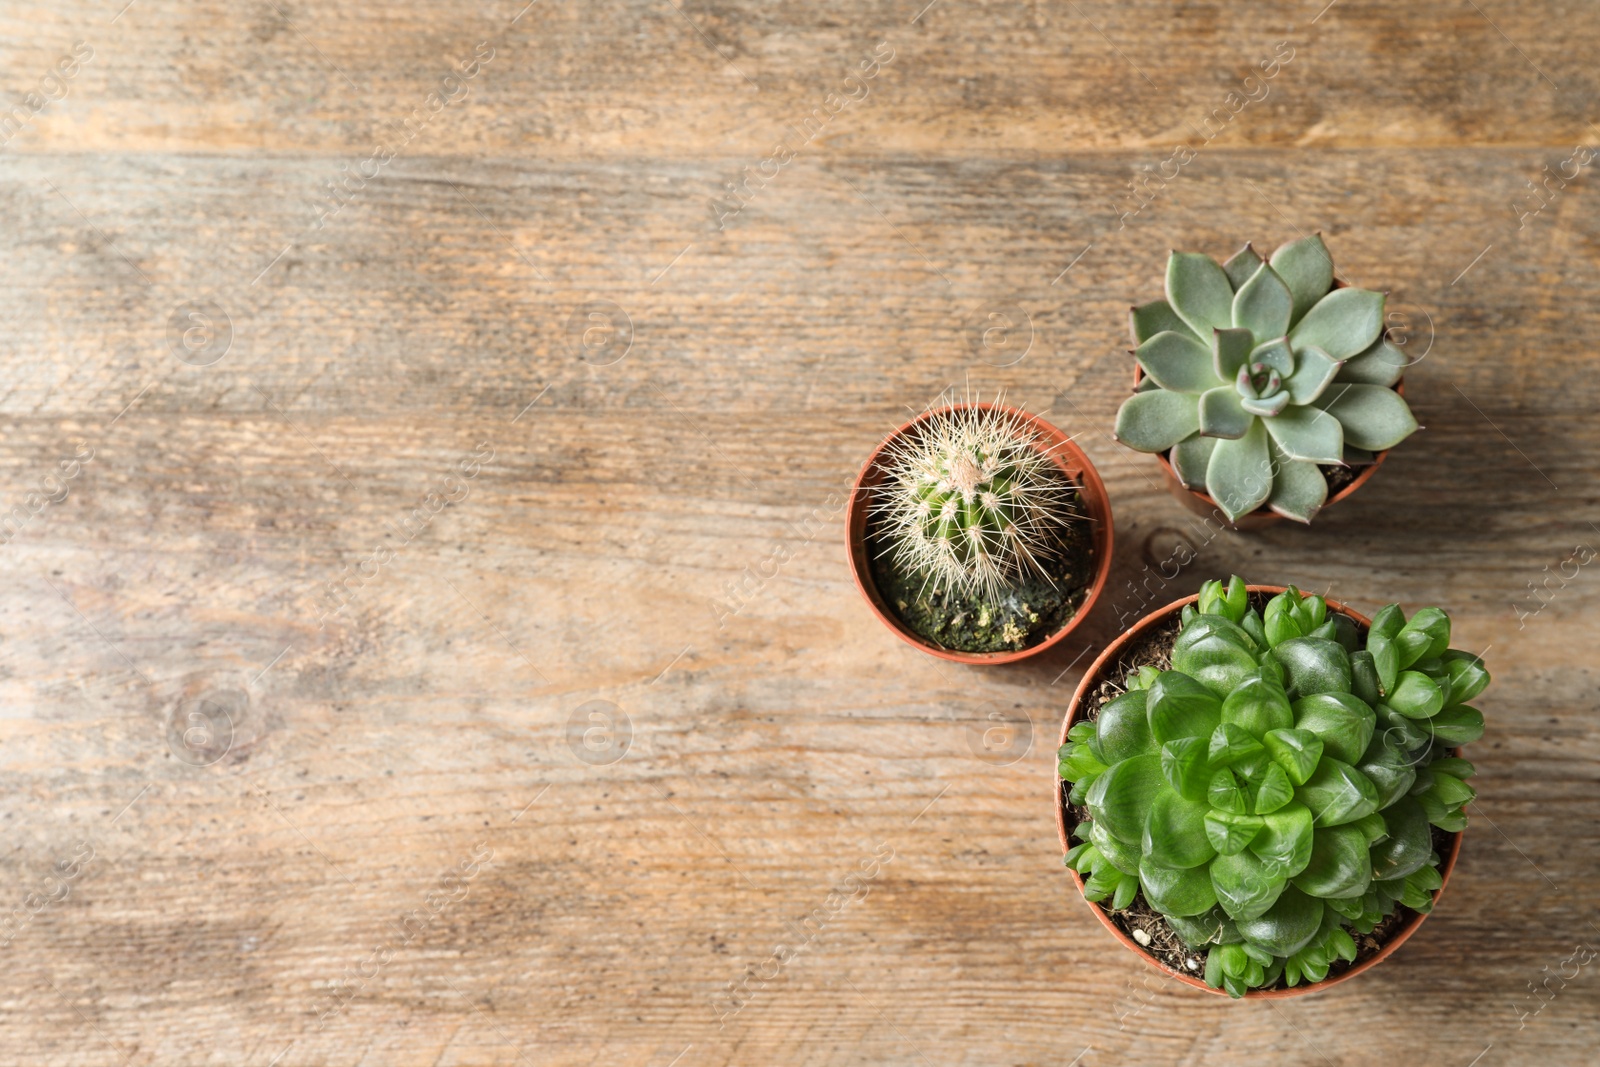 Photo of Flat lay composition with different succulent plants in pots on wooden table, space for text. Home decor